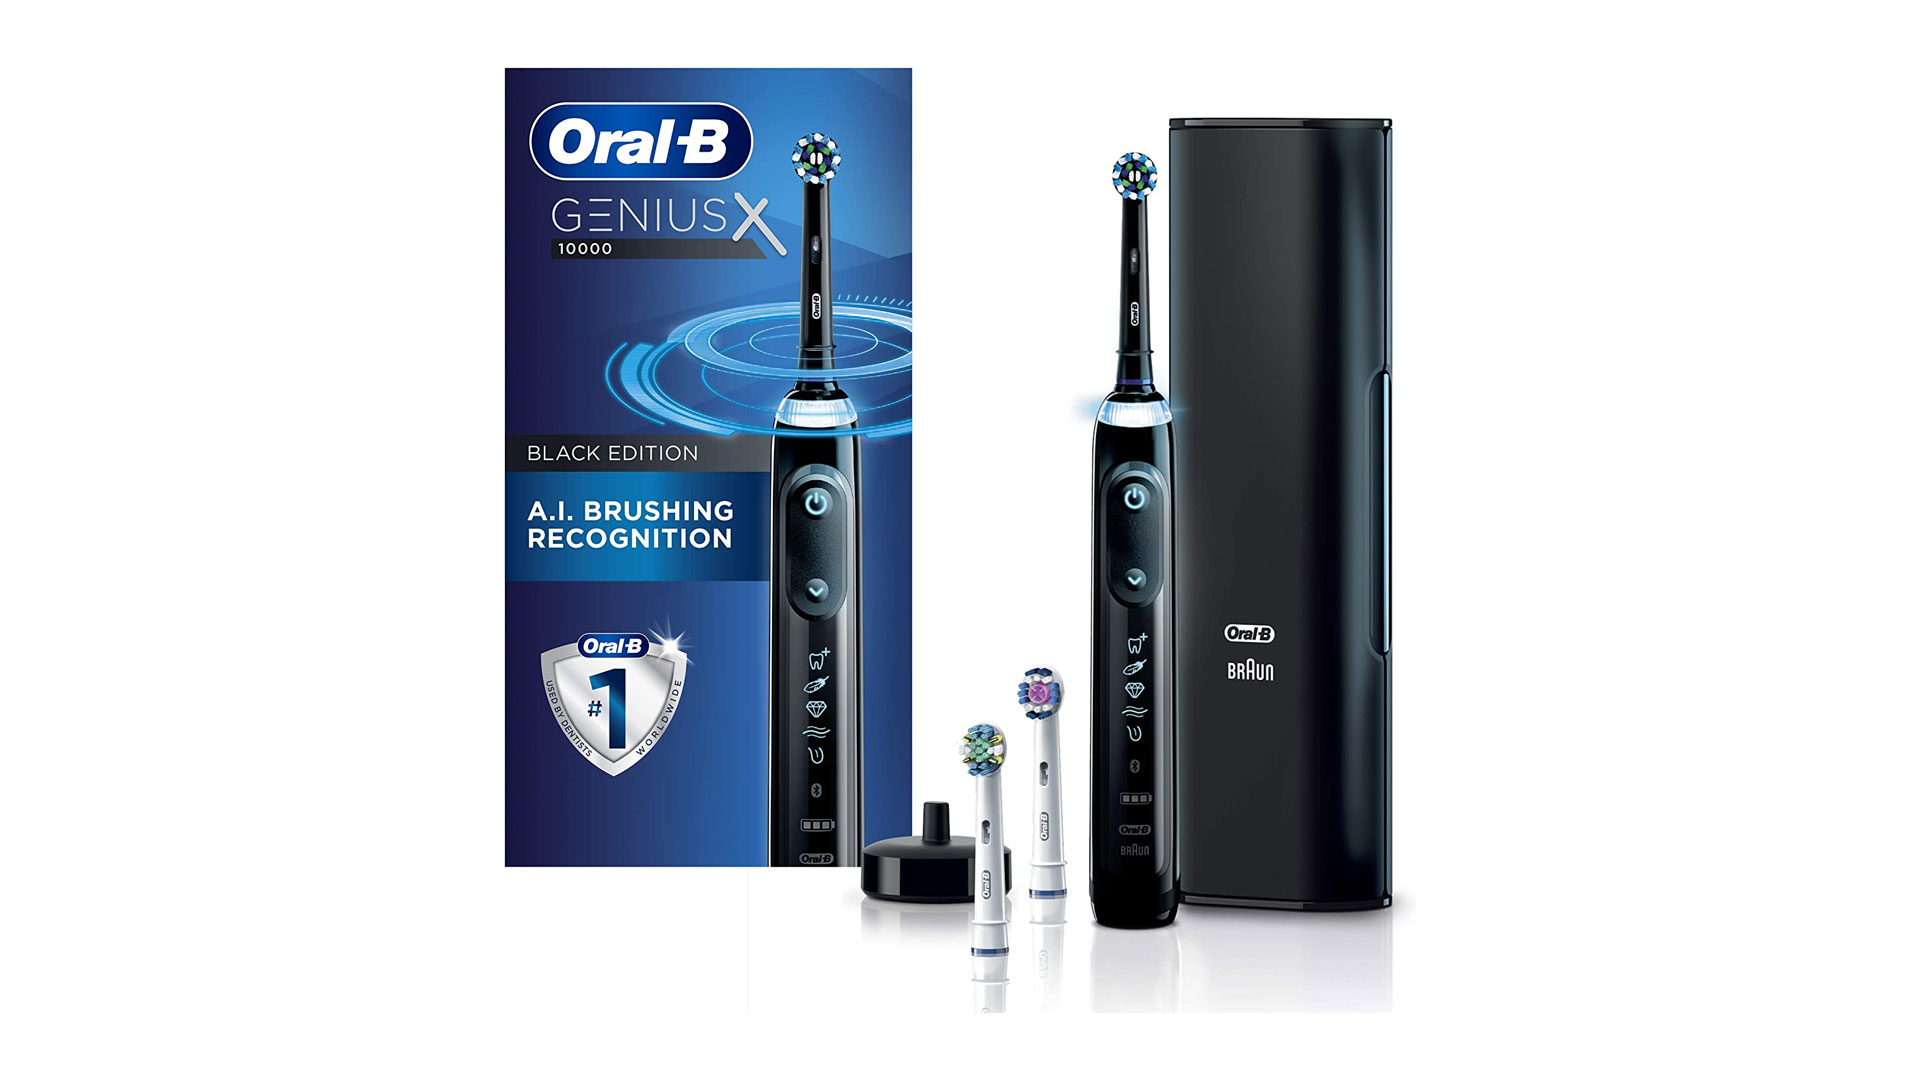  Oral-B Corded ElectricGenius X Toothbrush Patient